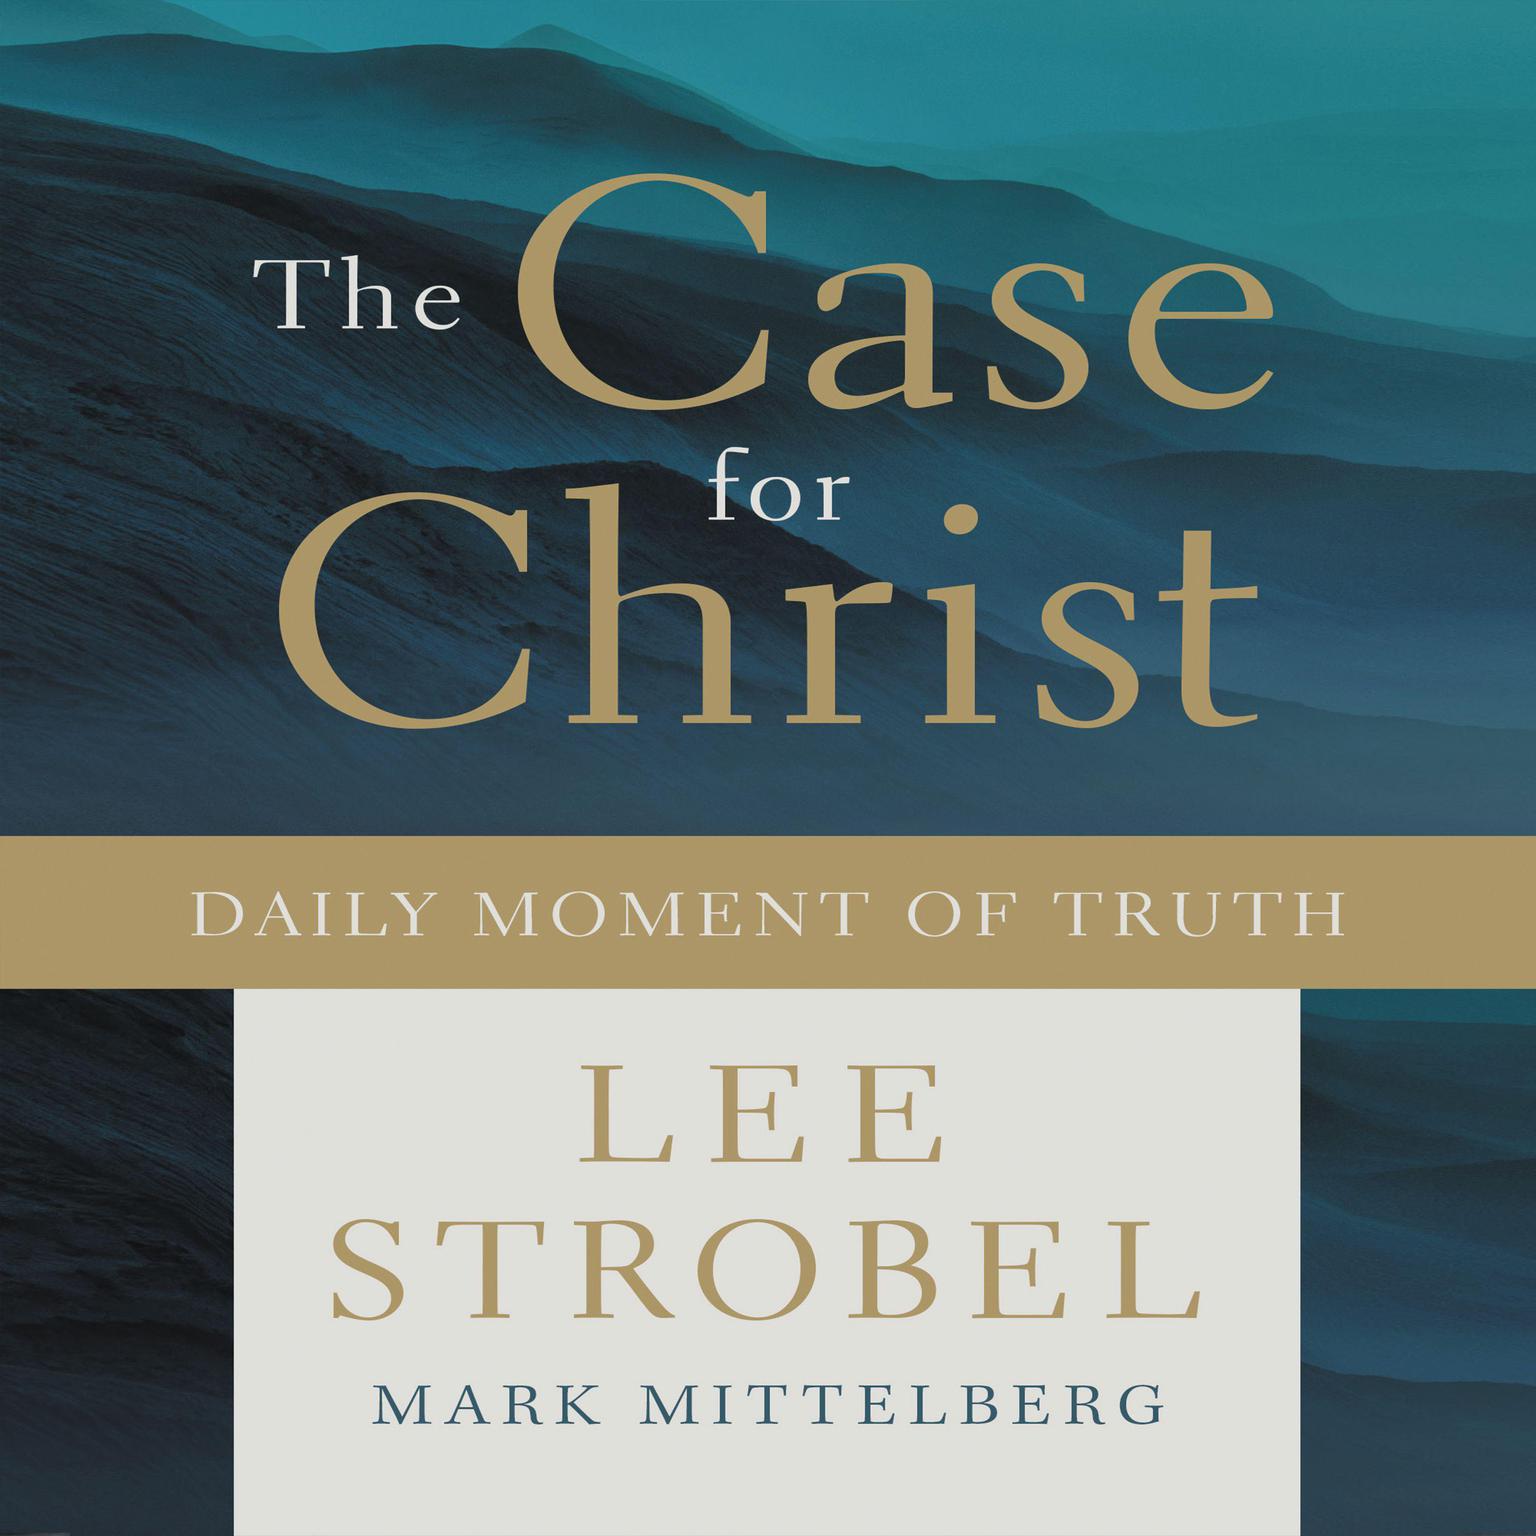 The Case for Christ Daily Moment of Truth Audiobook, by Lee Strobel